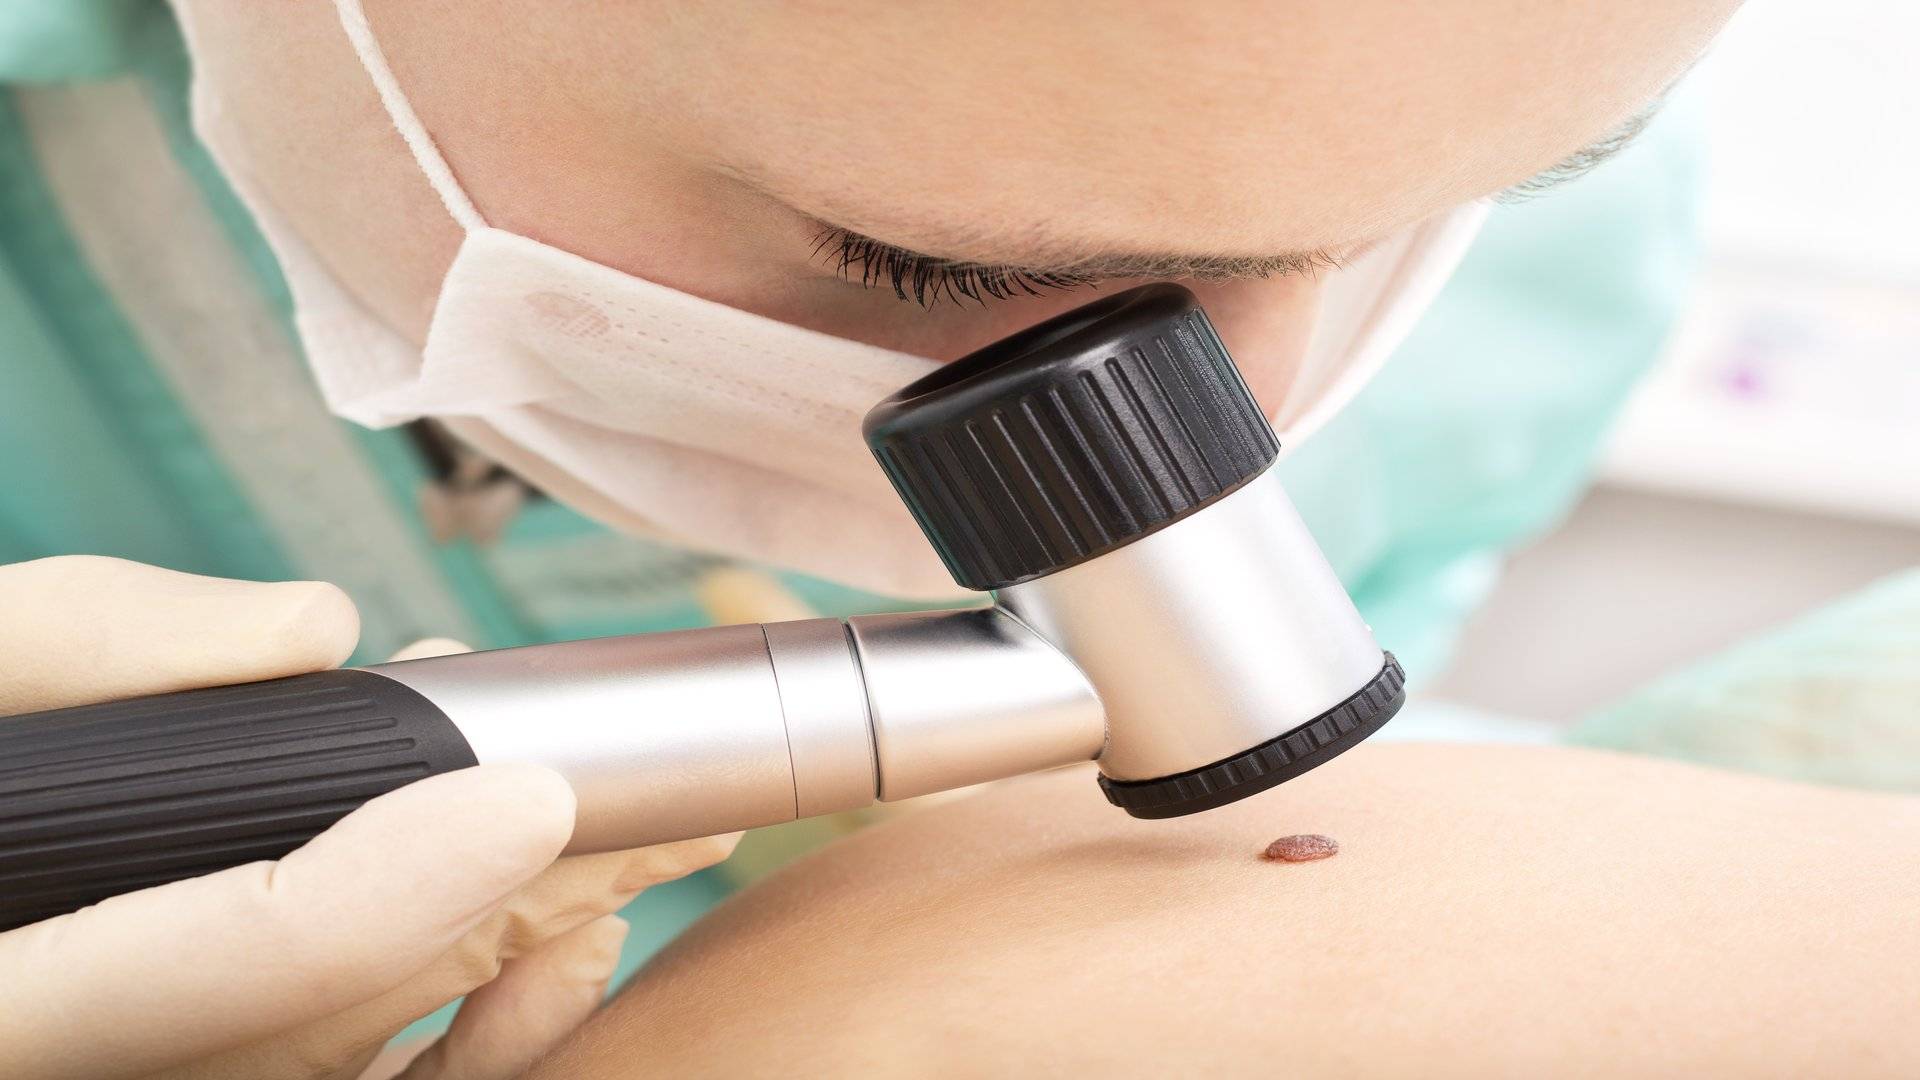 Get Quality Treatment at Gold Coast Skin Cancer Clinic